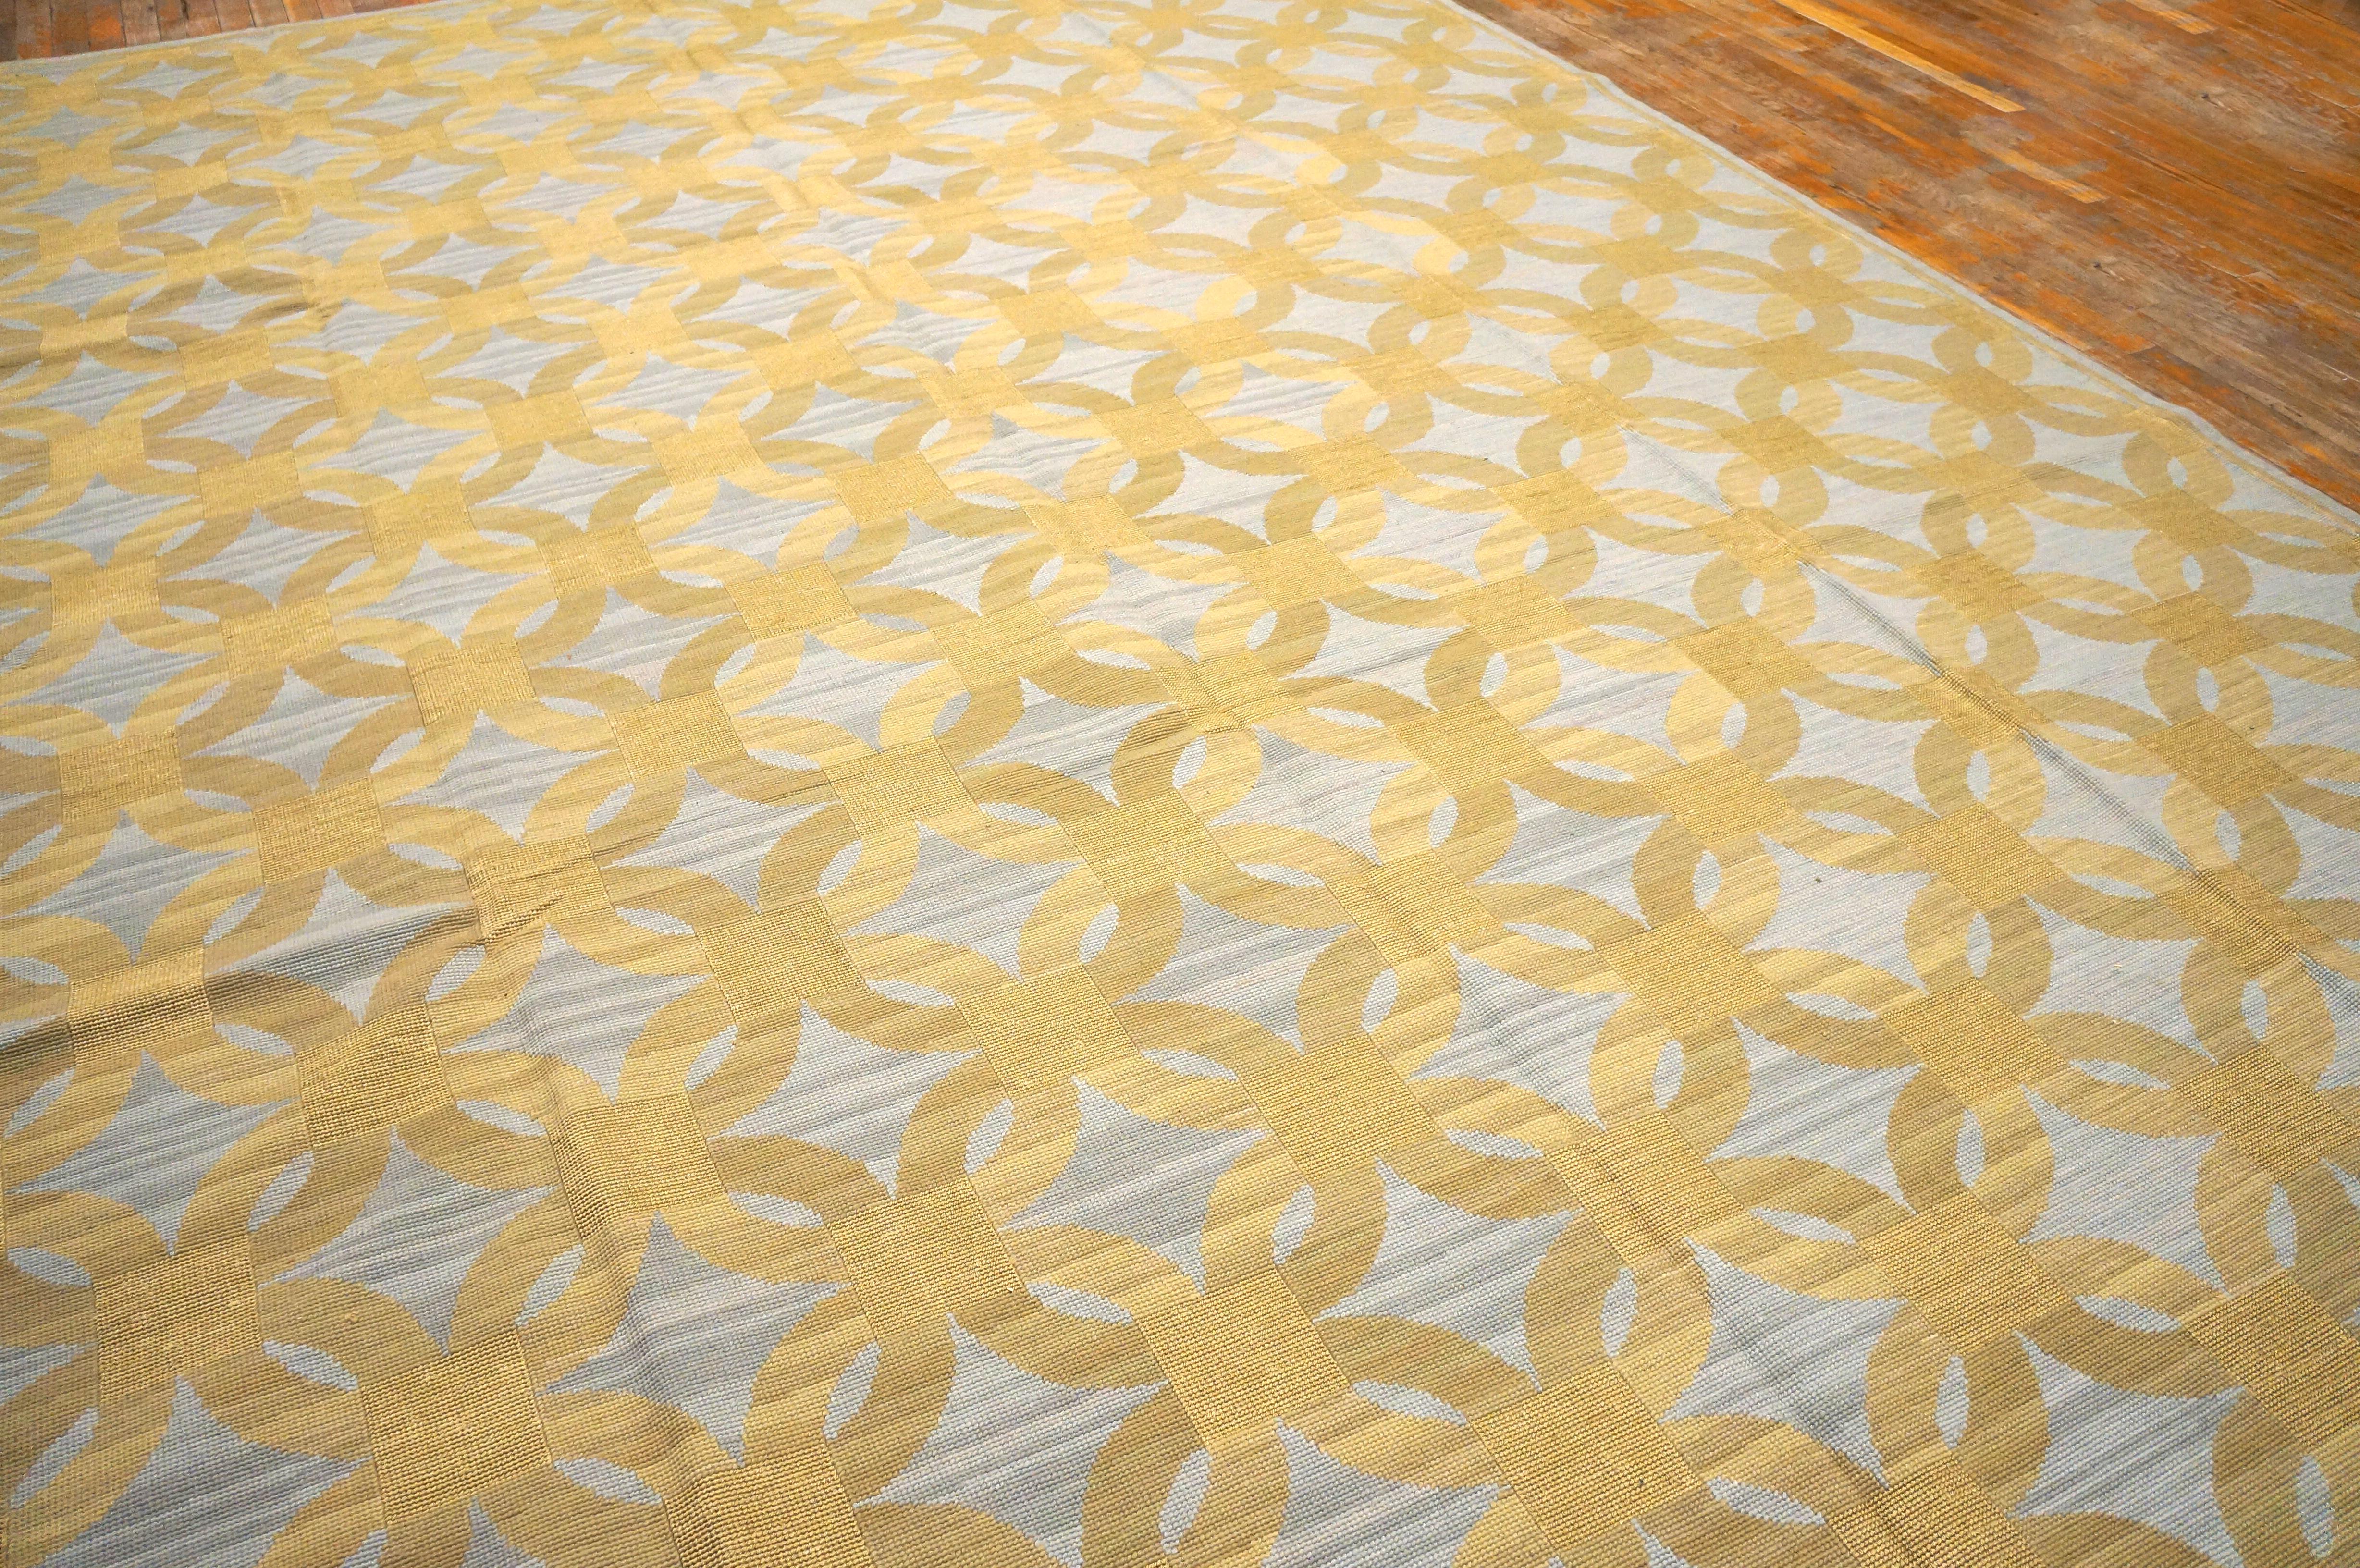 Contemporaneity Handwoven Wool Needlepoint Flat Weave Carpet With Silk Highlight For Sale 4